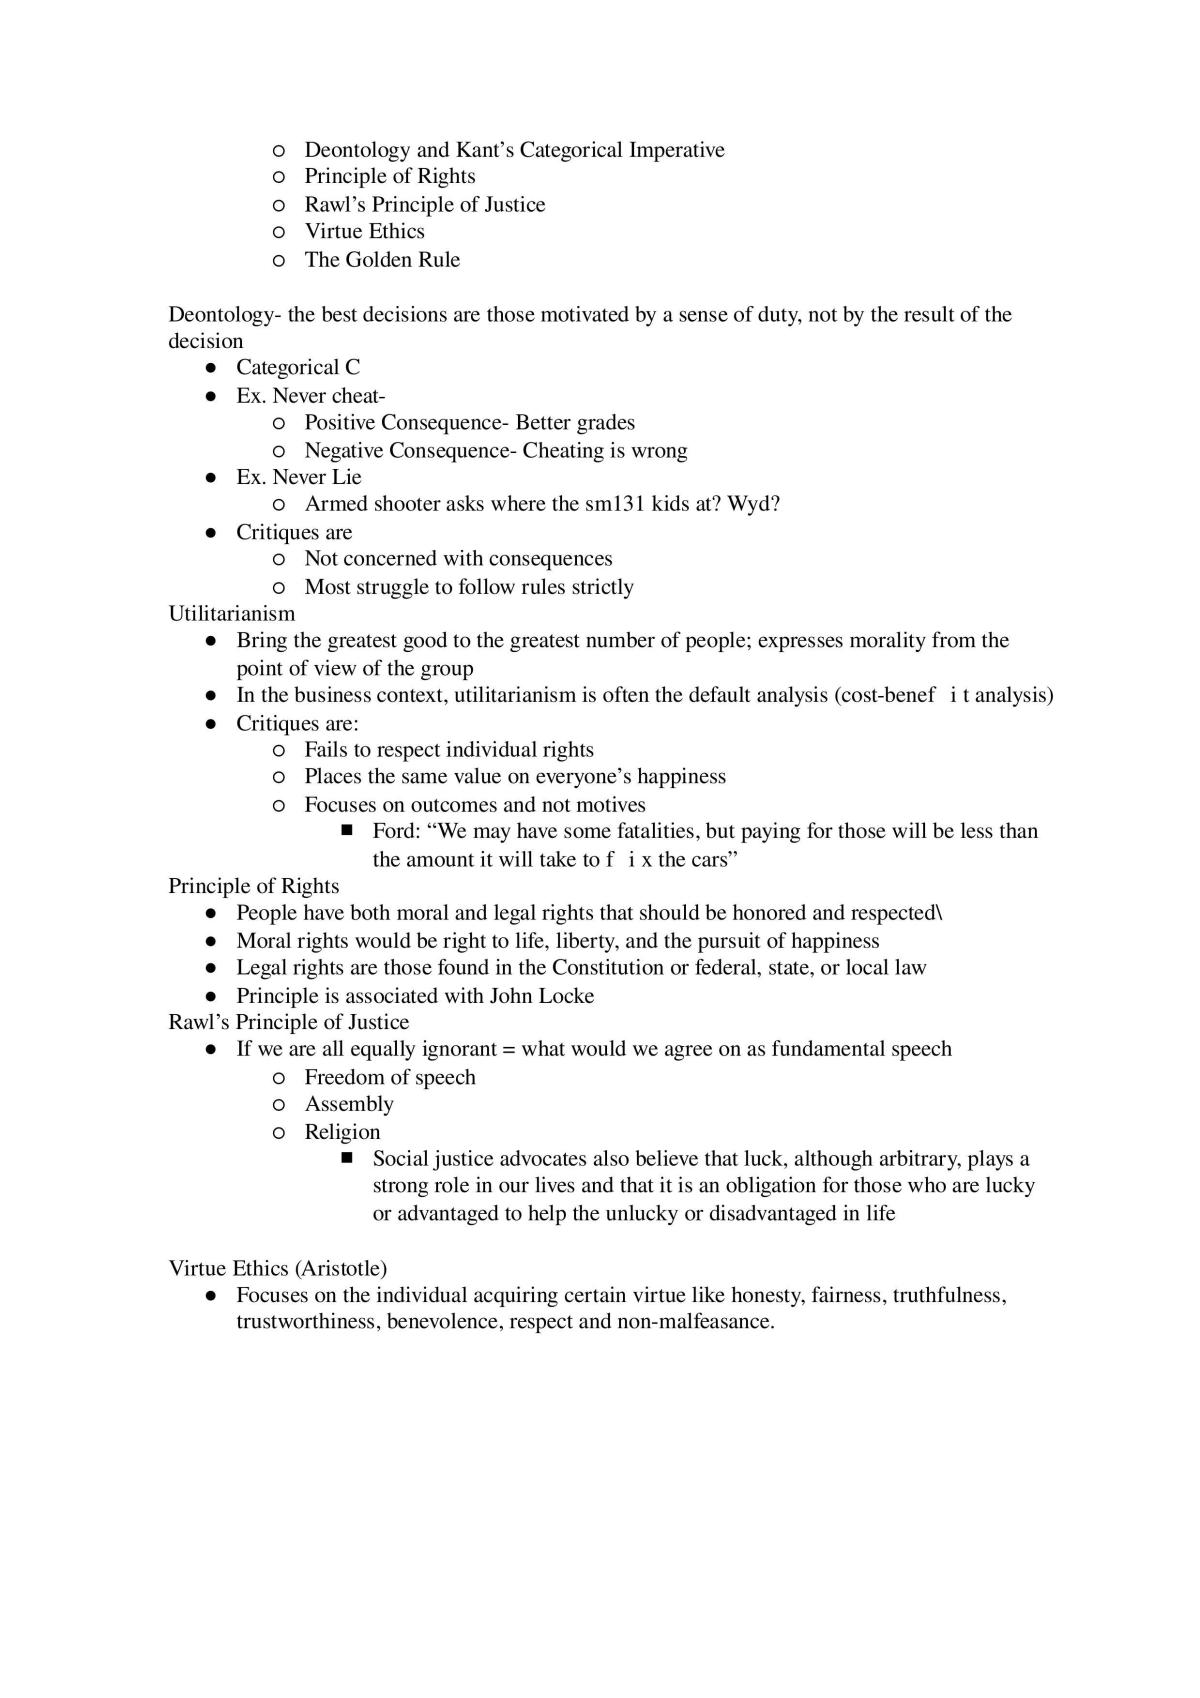 Final Exam Study Guide - Page 20